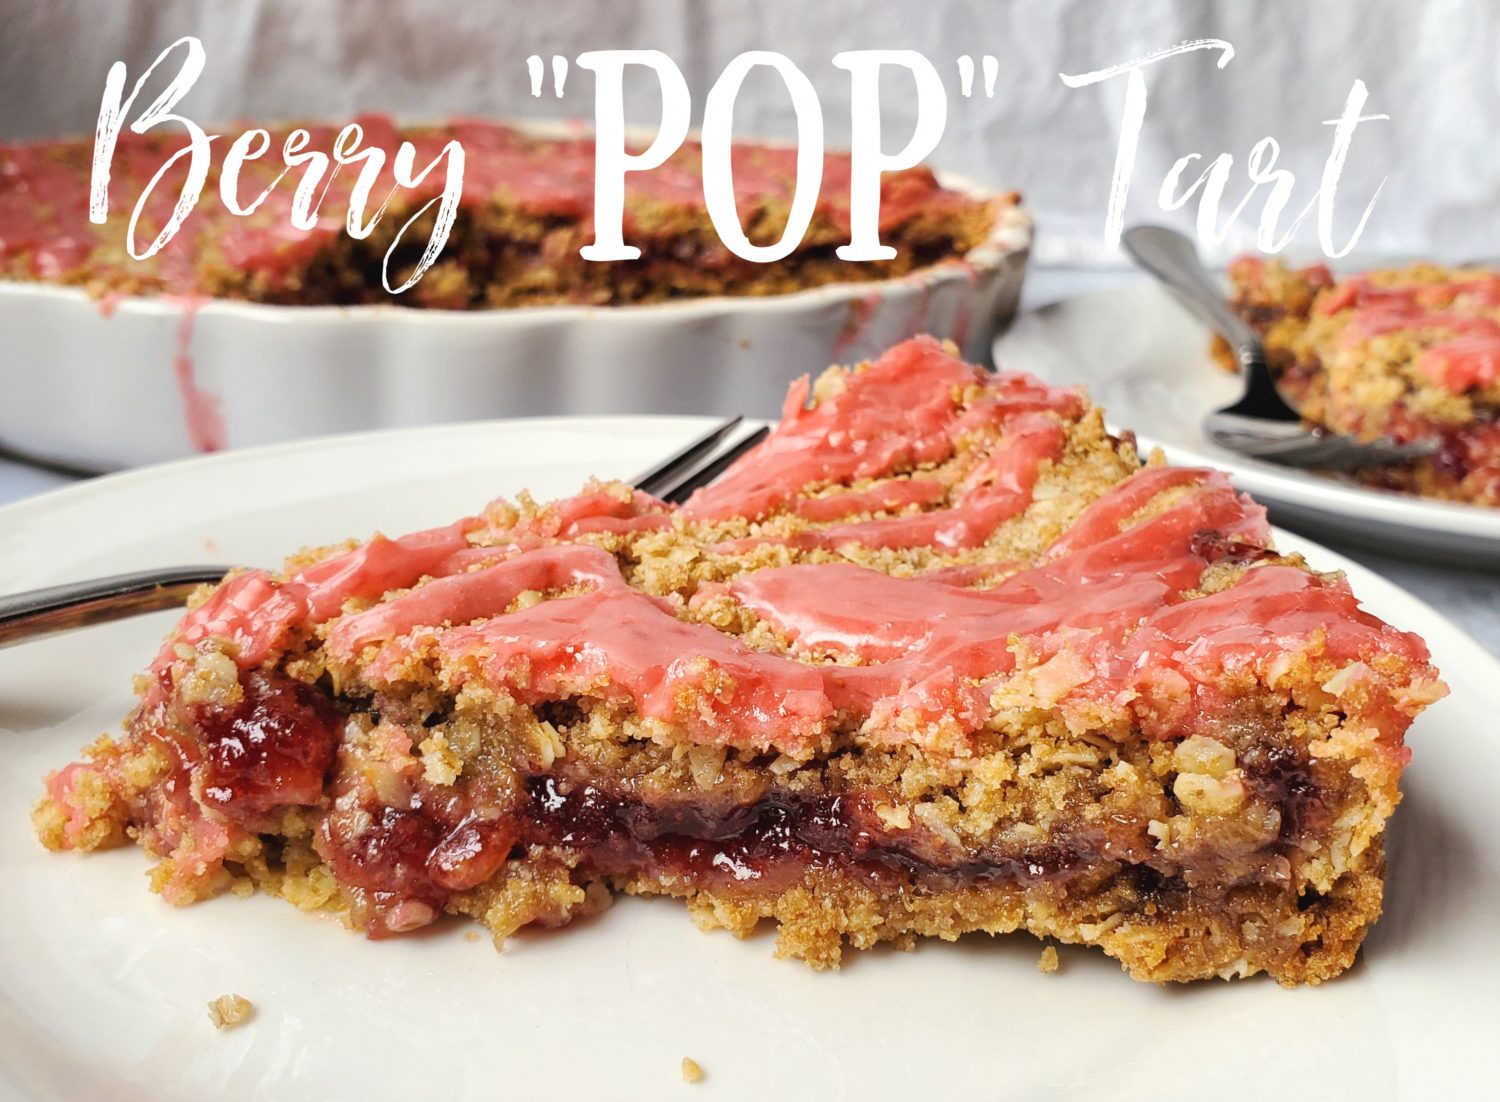 It's BERRY season! Kick off summer with a fresh and fruity berry brown-sugar shortbread tart, filled with your favorite jam or pre-cooked pie filling, very berry-licious!